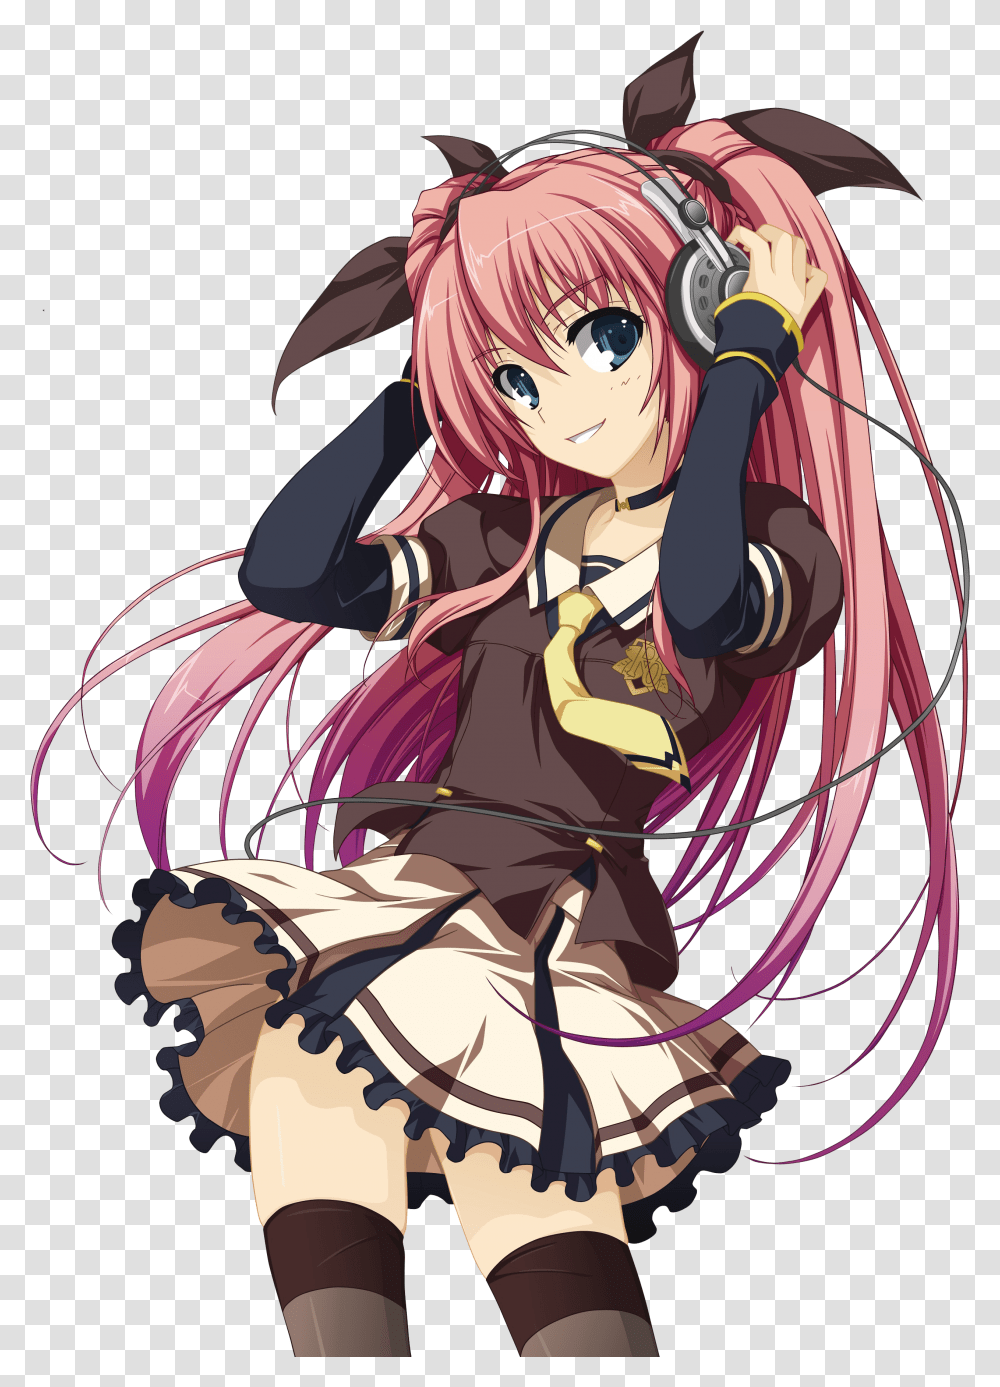 Wallpaper Anime Girls Pink Hair Long Headphones Animated Wallpaper Android Anime Transparent Png